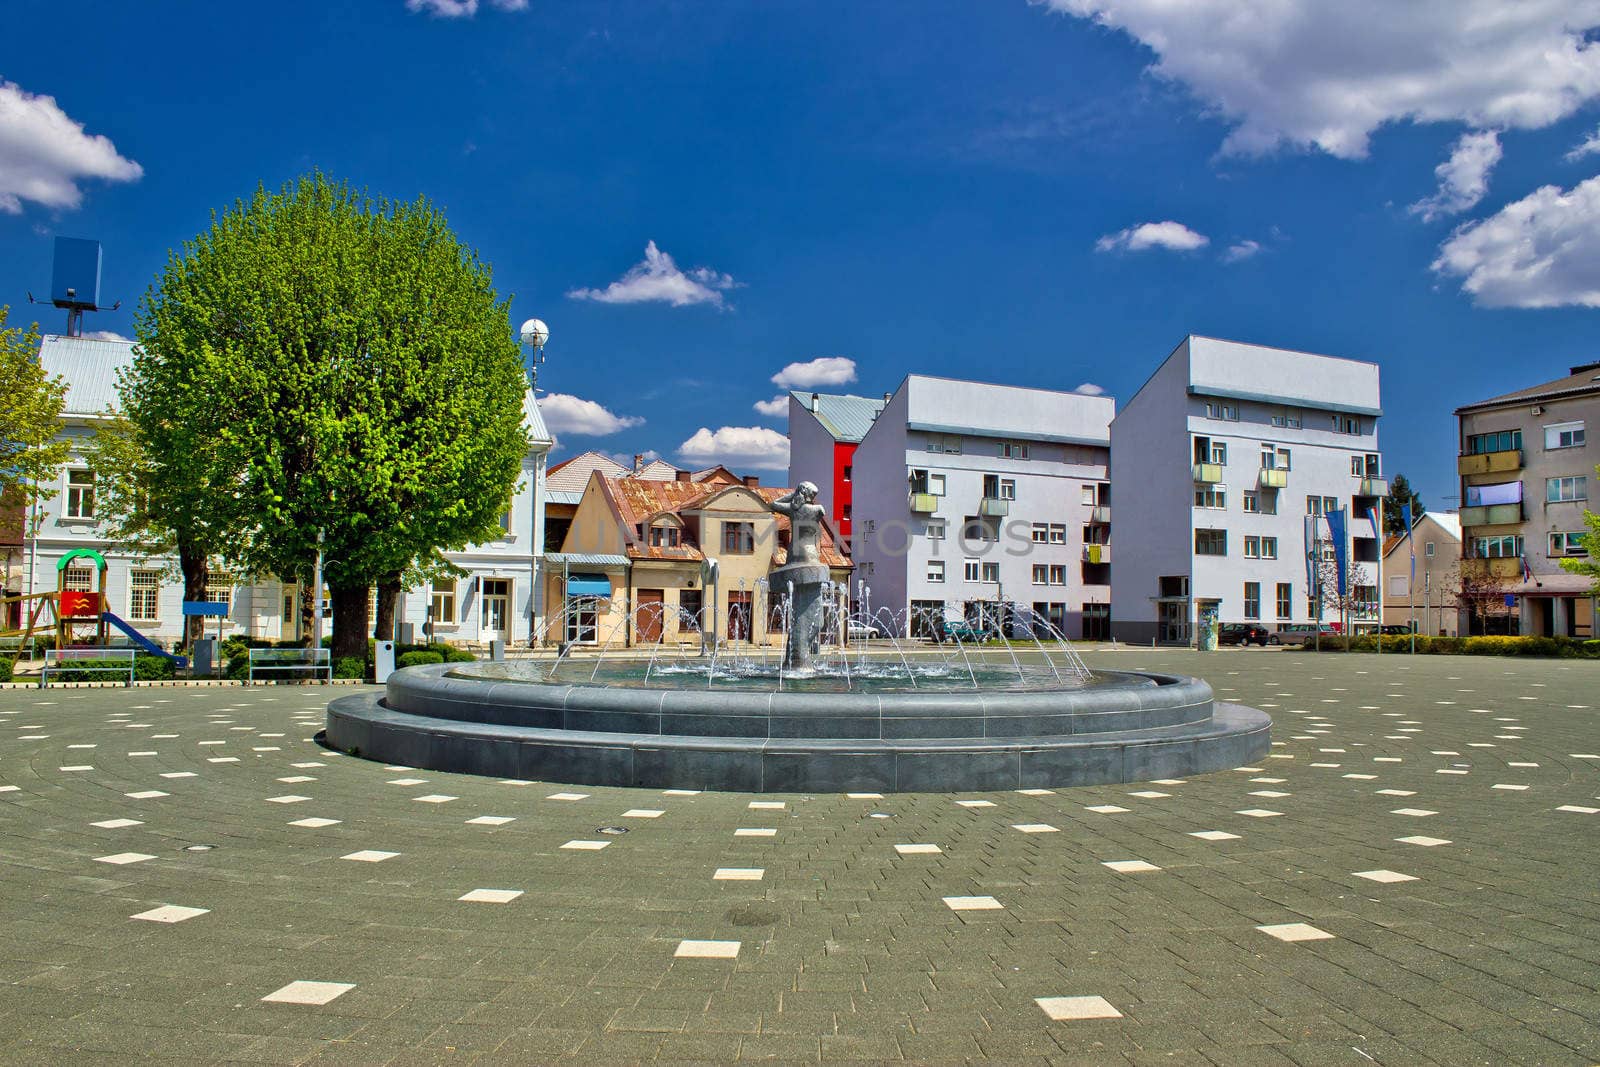 Town of Gospic square fountain by xbrchx